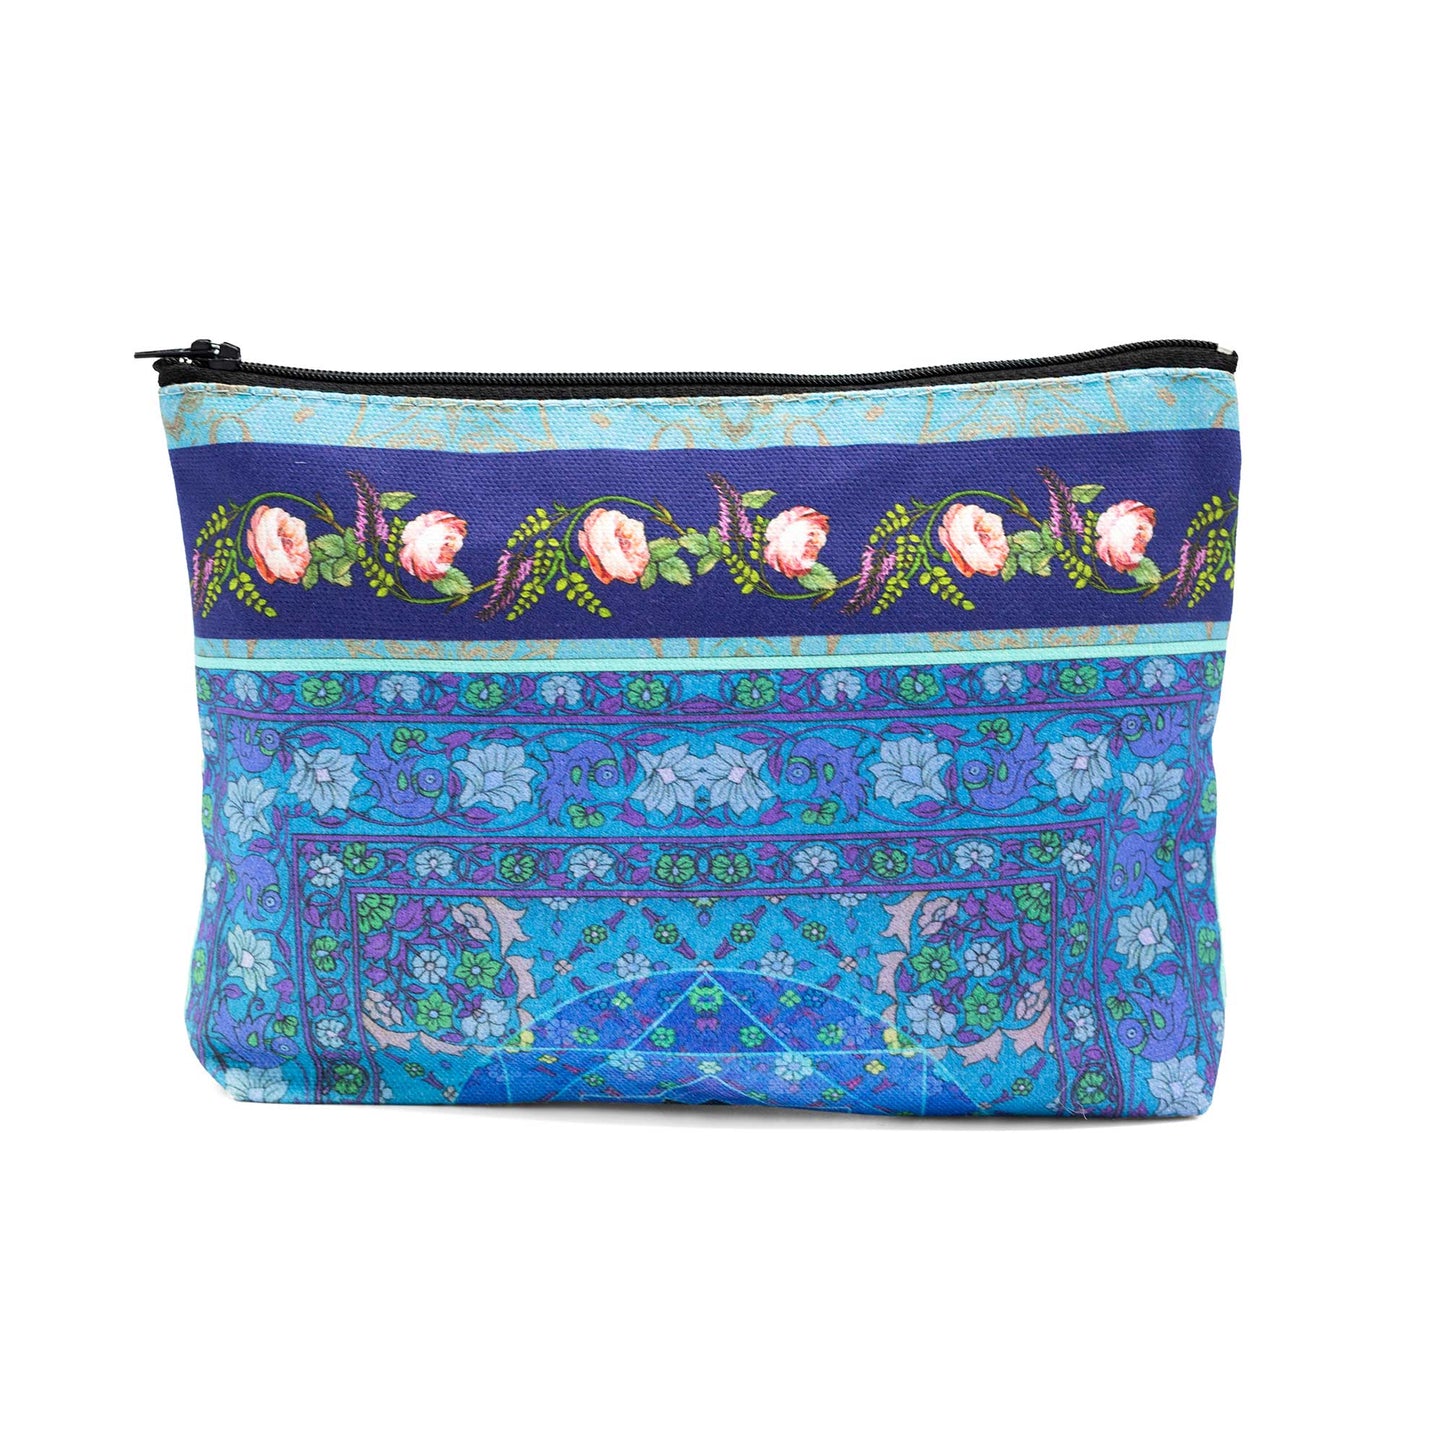 Load image into Gallery viewer, Cosmetics bag featuring The Singh Twins Knowledge Design. Blue and green pattern with a floral border.
